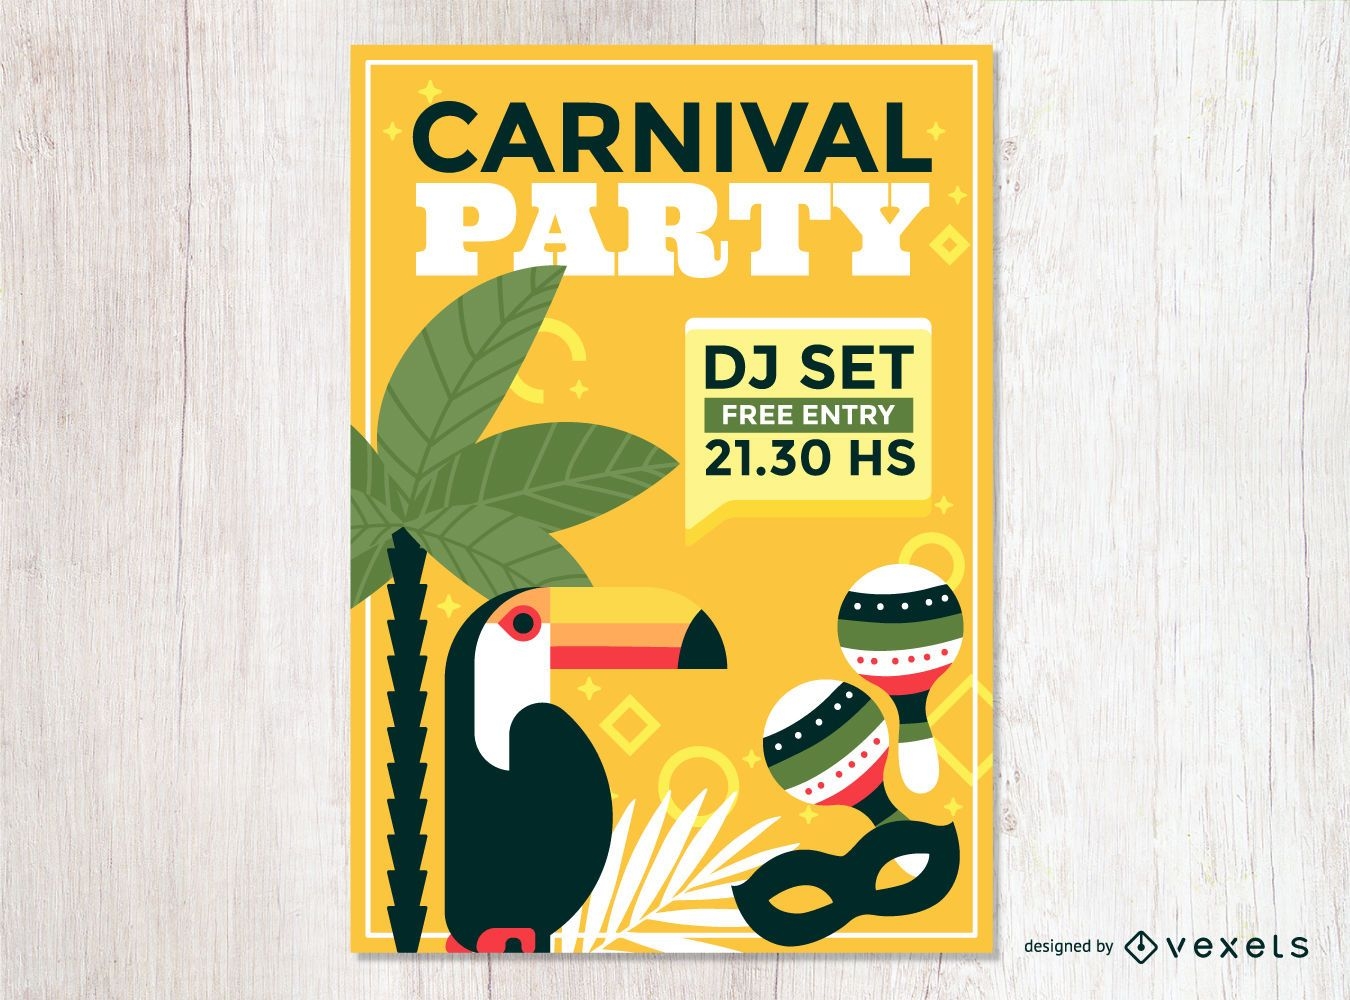 Carnival party poster design